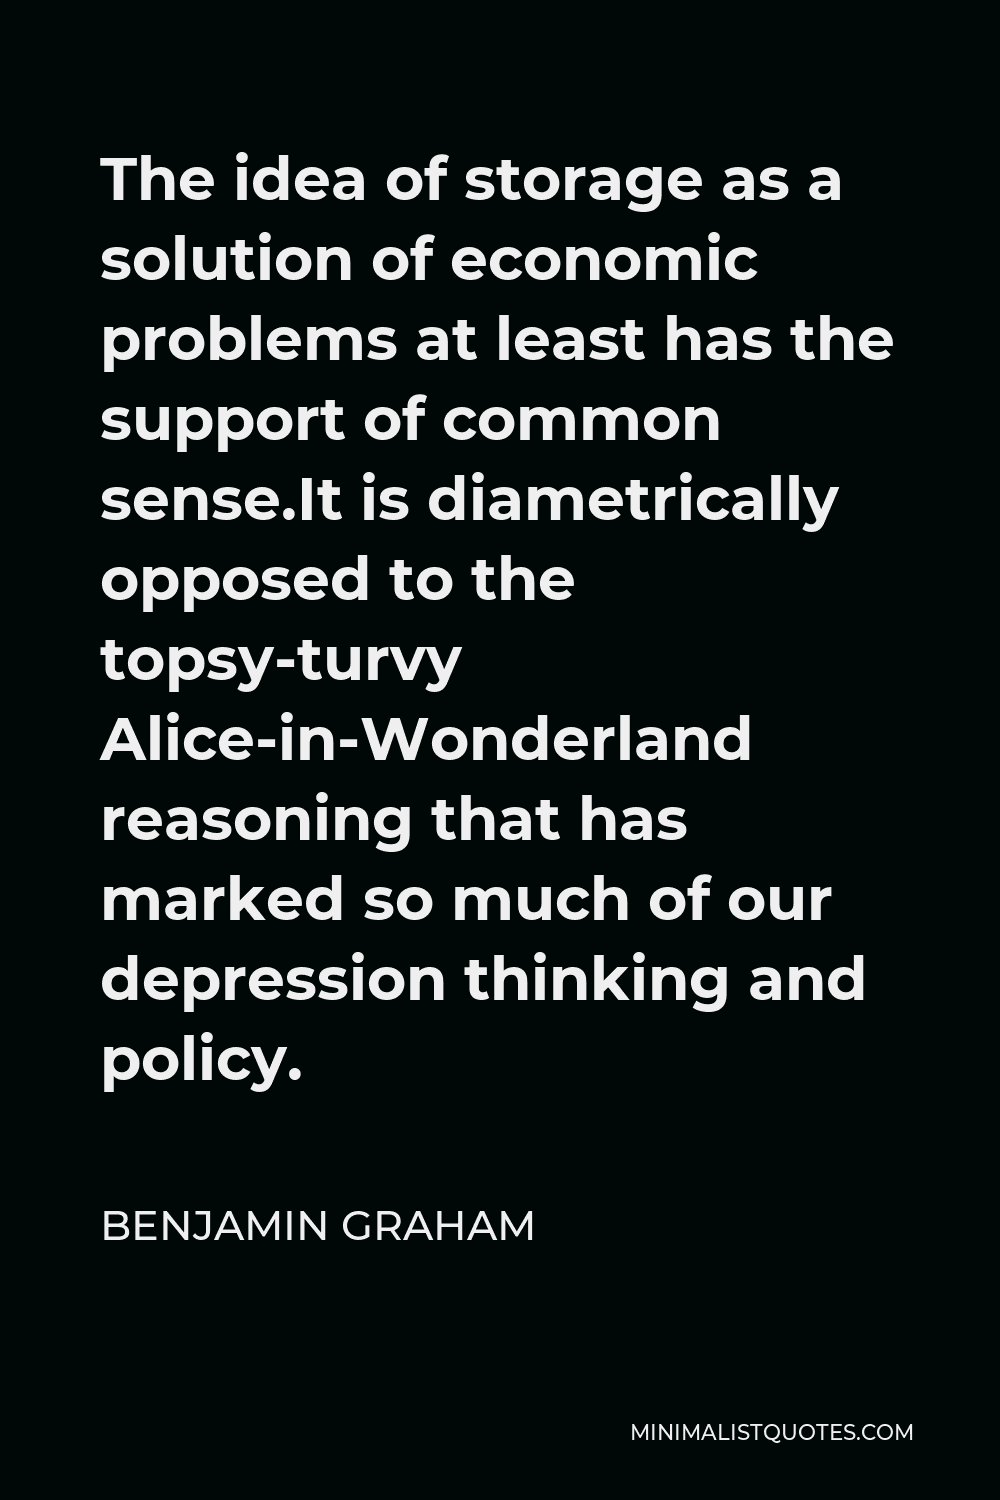 Benjamin Graham Quote - The idea of storage as a solution of economic problems at least has the support of common sense.It is diametrically opposed to the topsy-turvy Alice-in-Wonderland reasoning that has marked so much of our depression thinking and policy.